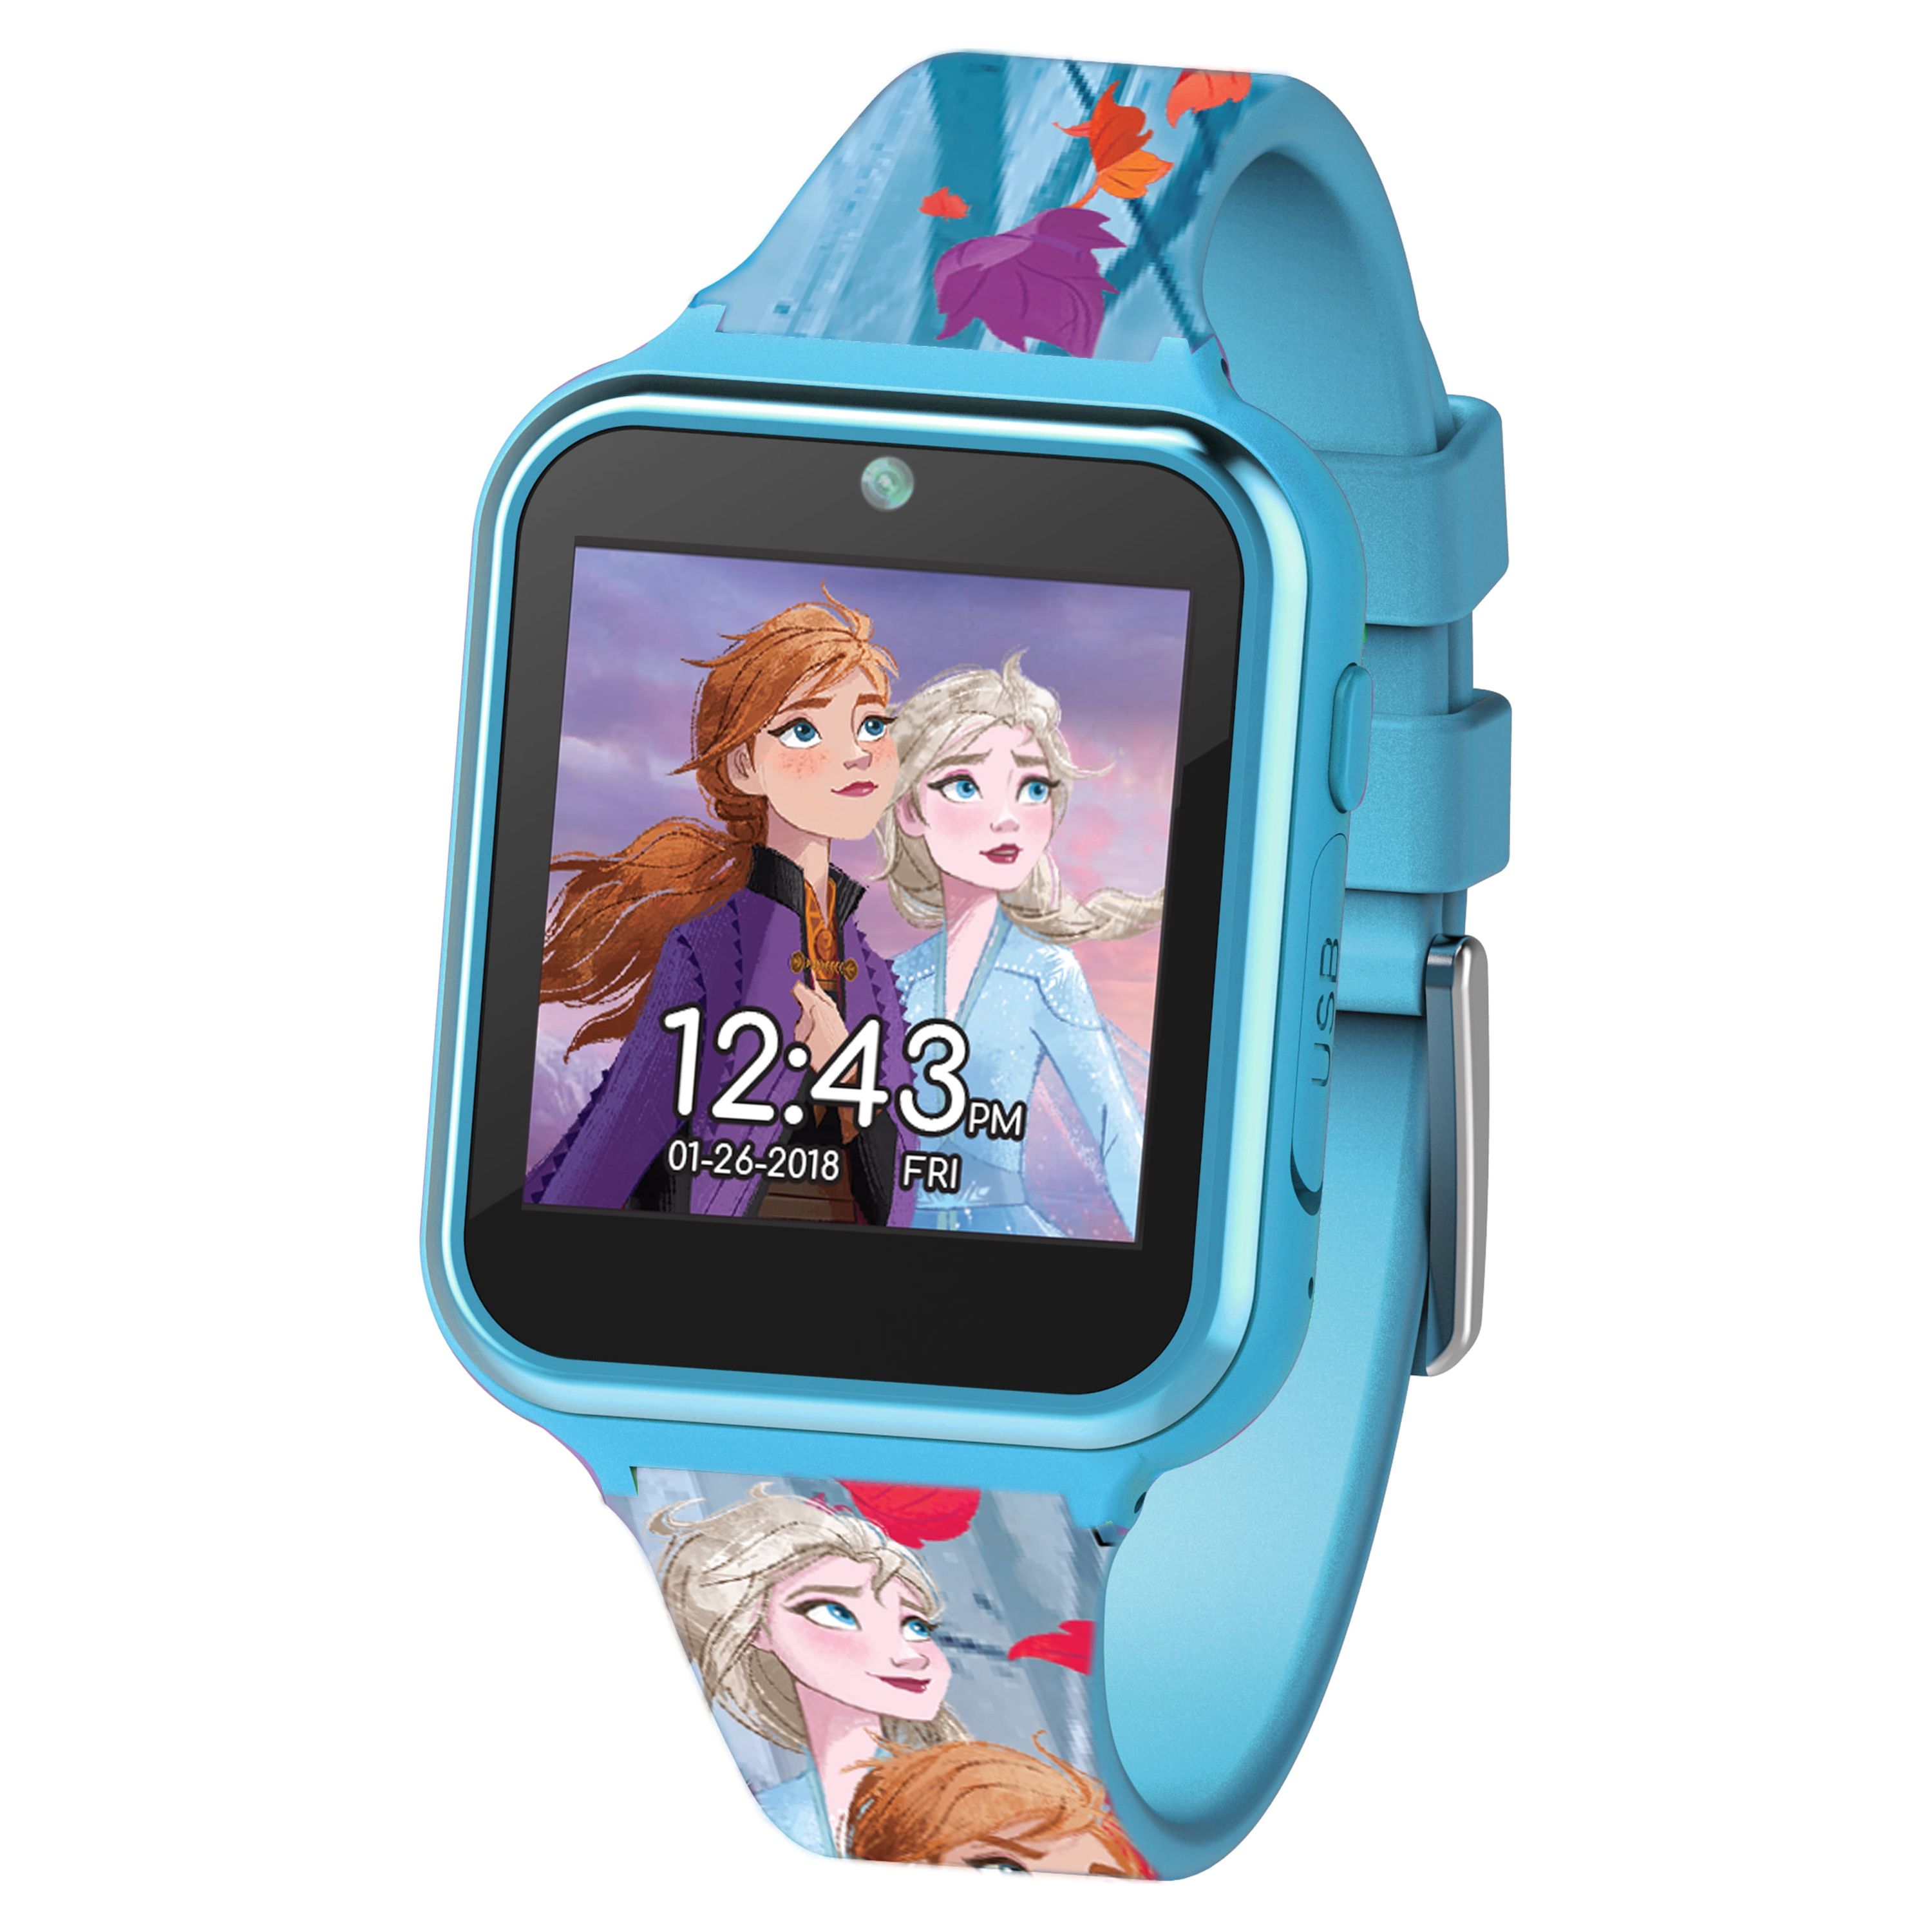 Disney Frozen 2 Female Child iTime Interactive Smart Watch 40mm in Blue (FZN4587) - image 1 of 5